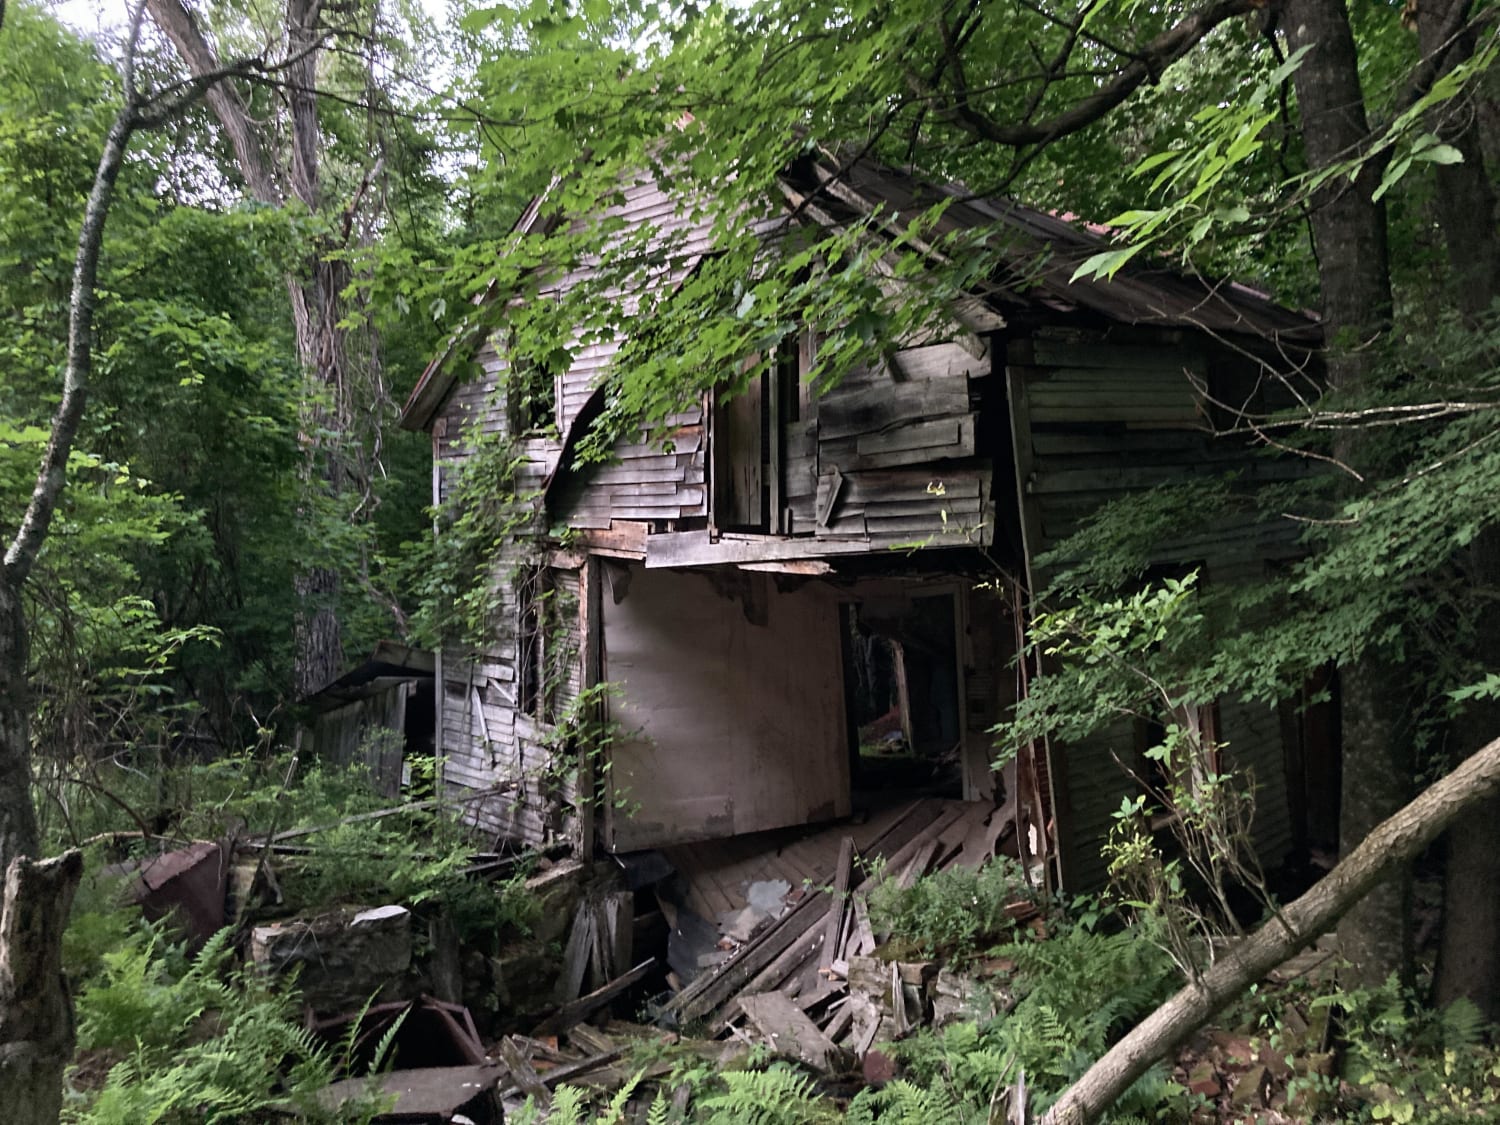 House I found on an abandoned road in the woods in the Adirondacks